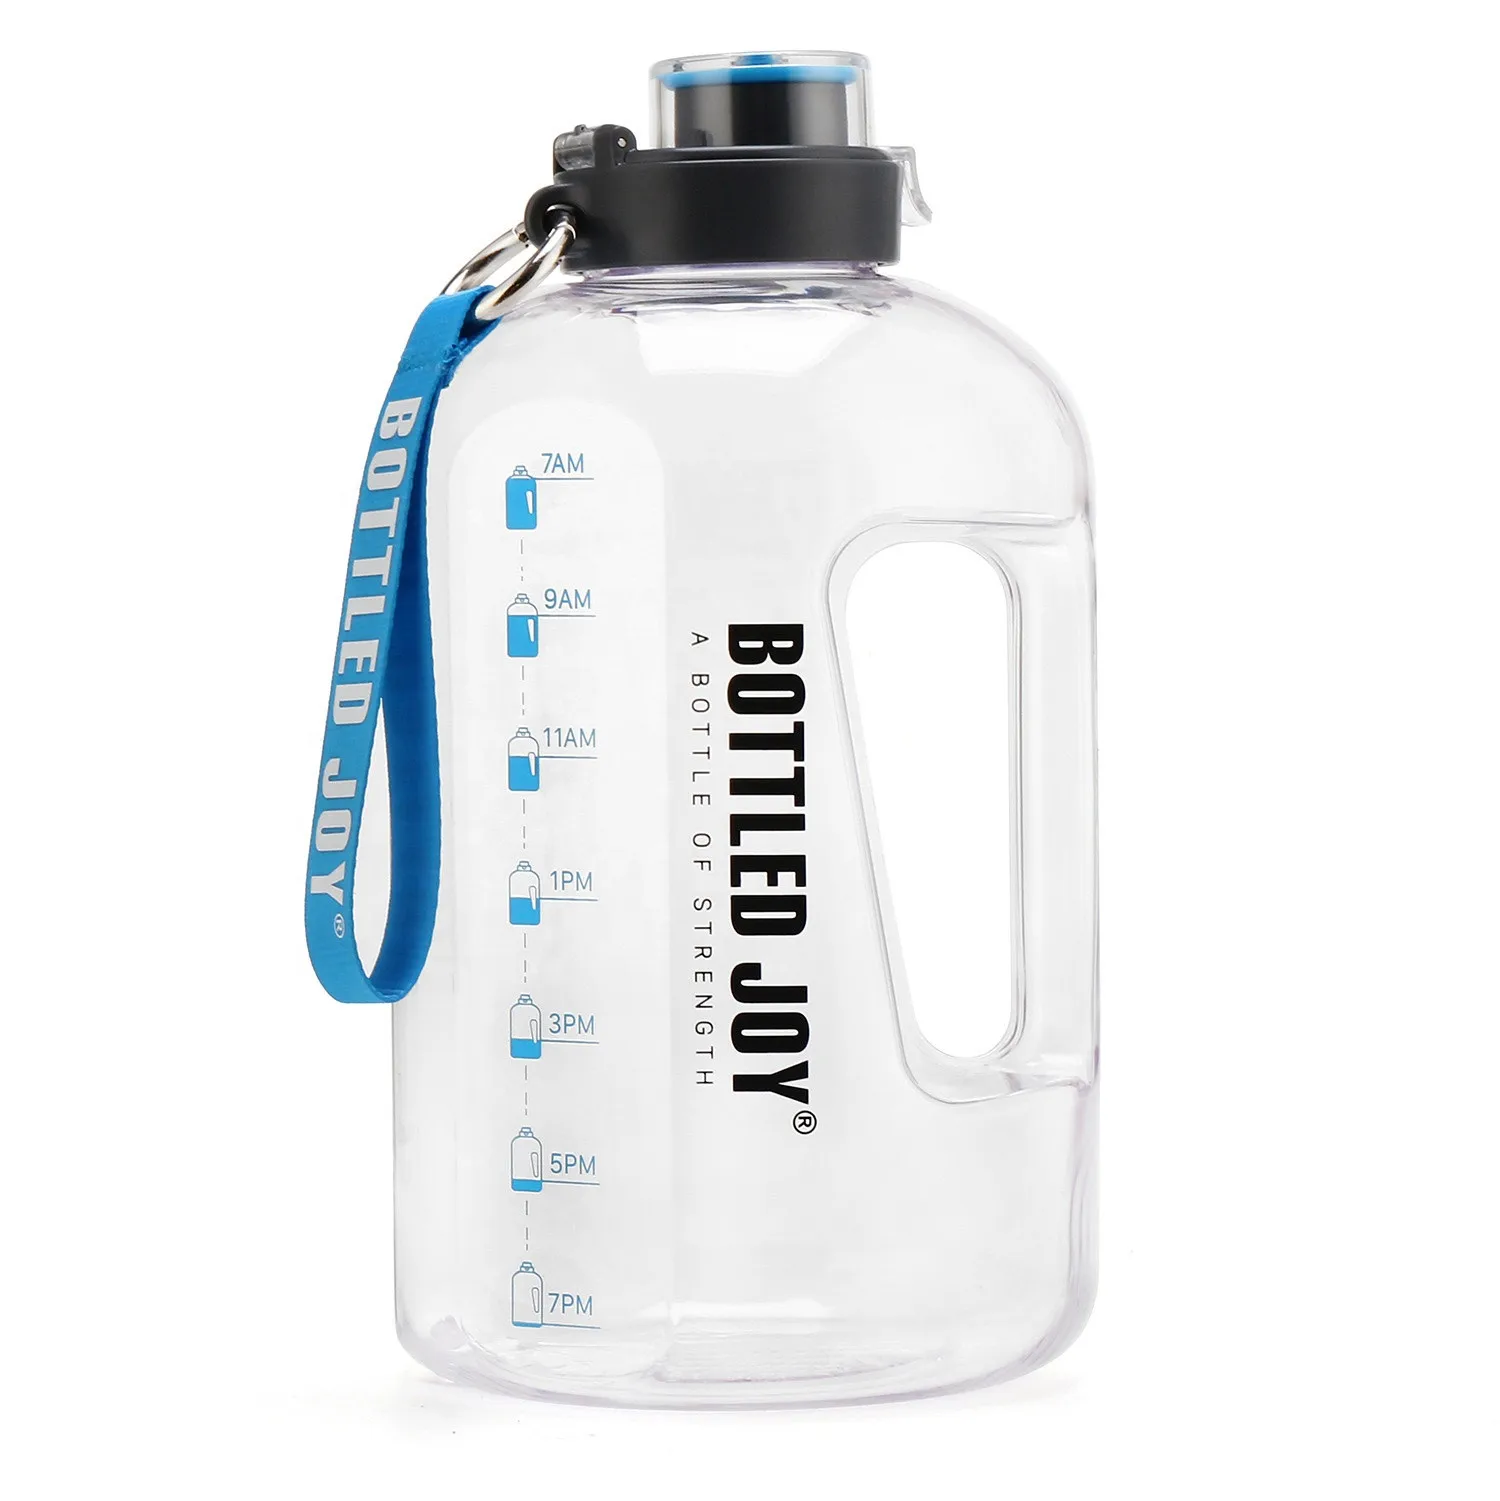 

BPA Free 1 Gallon Large Size Water Bottle Hydration With With Motivational Time Marker Reminder For Camping Workouts And Outdoor